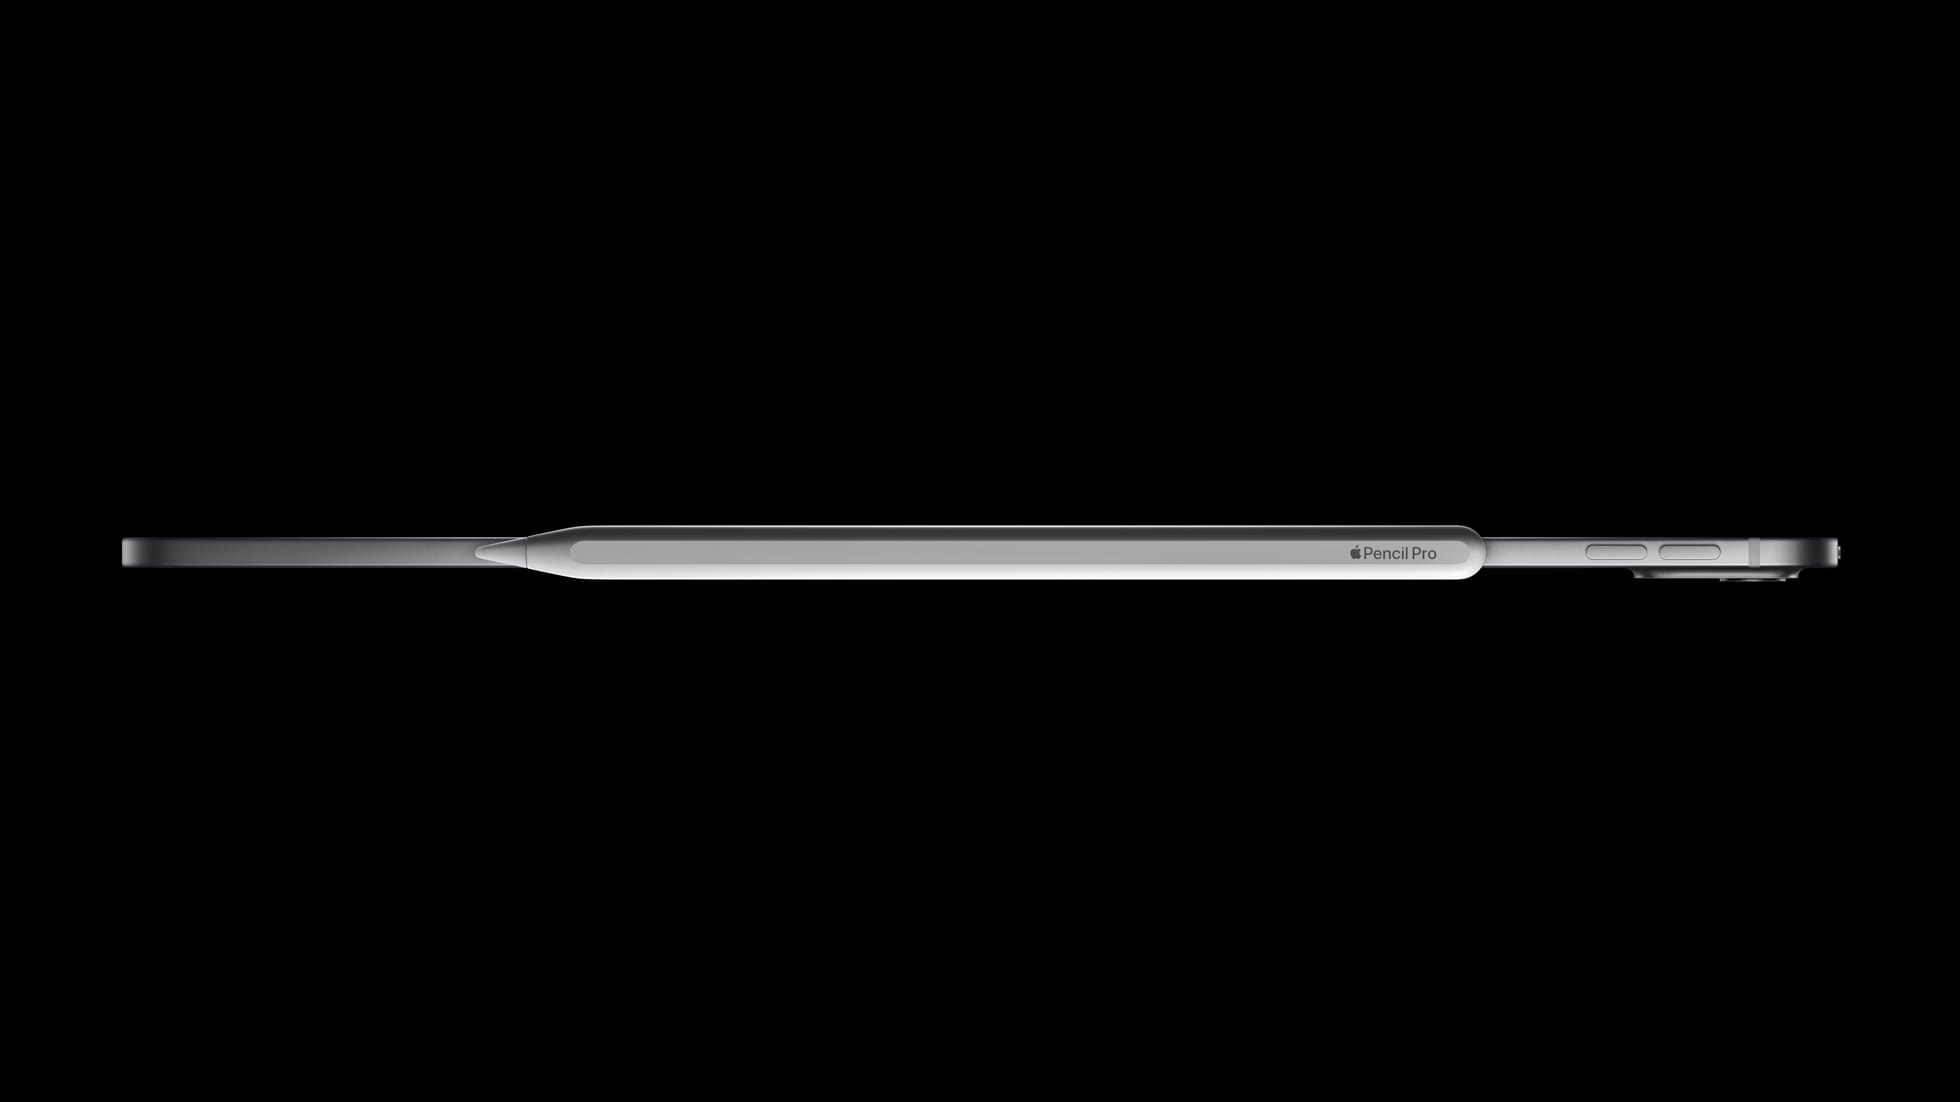 Side view of the pencil attached to the iPad Pro on a black background